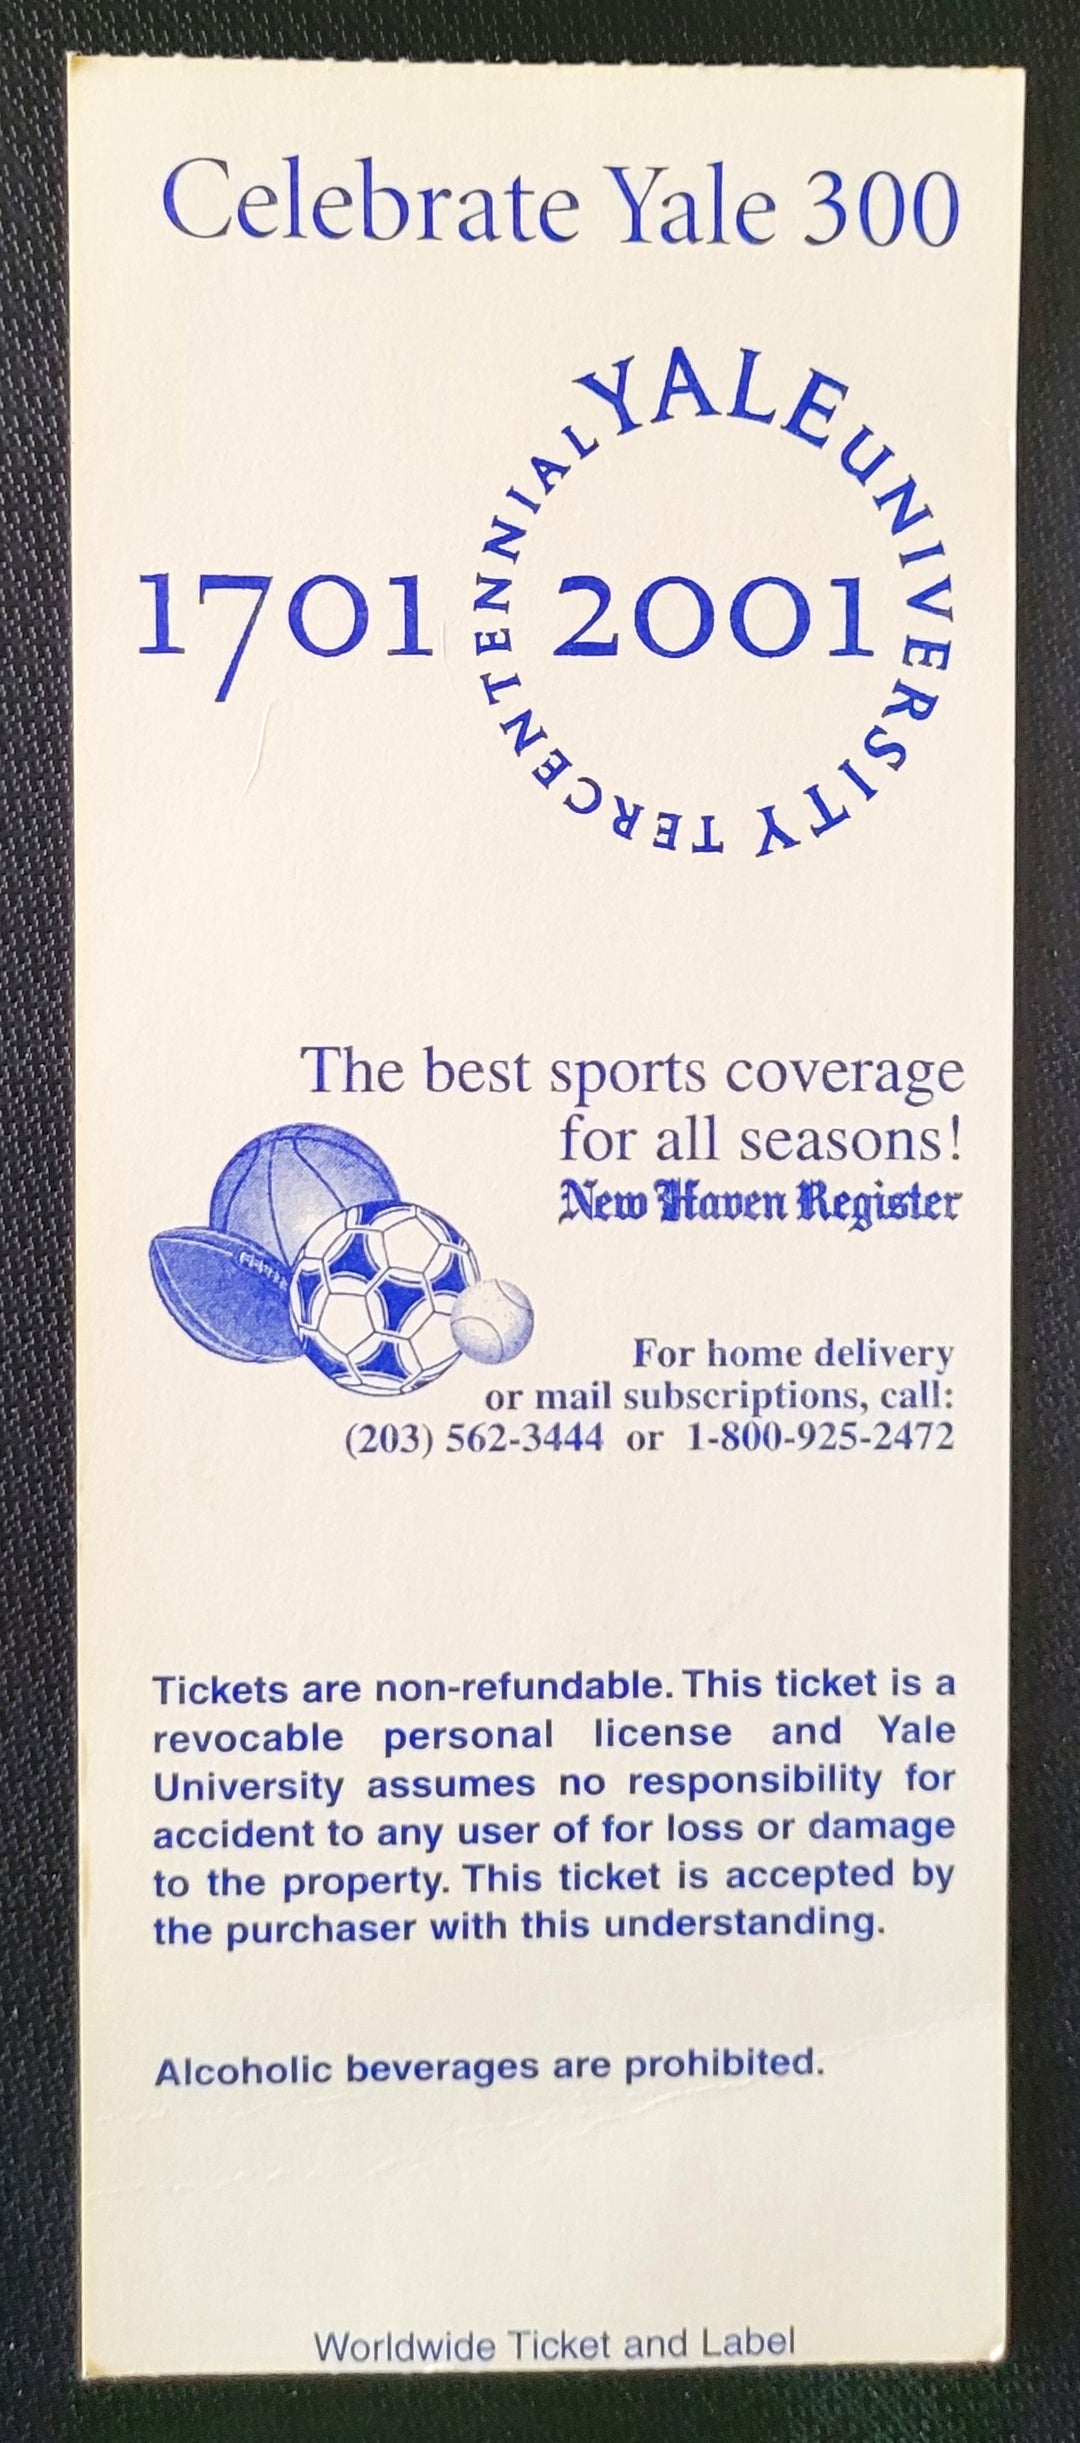 2001 Celebrate Yale 300 Yale vs Dartmouth Football Reserved Seat Ticket Stub Oct 7, 2001 Yale Bowl New Haven, Ct.